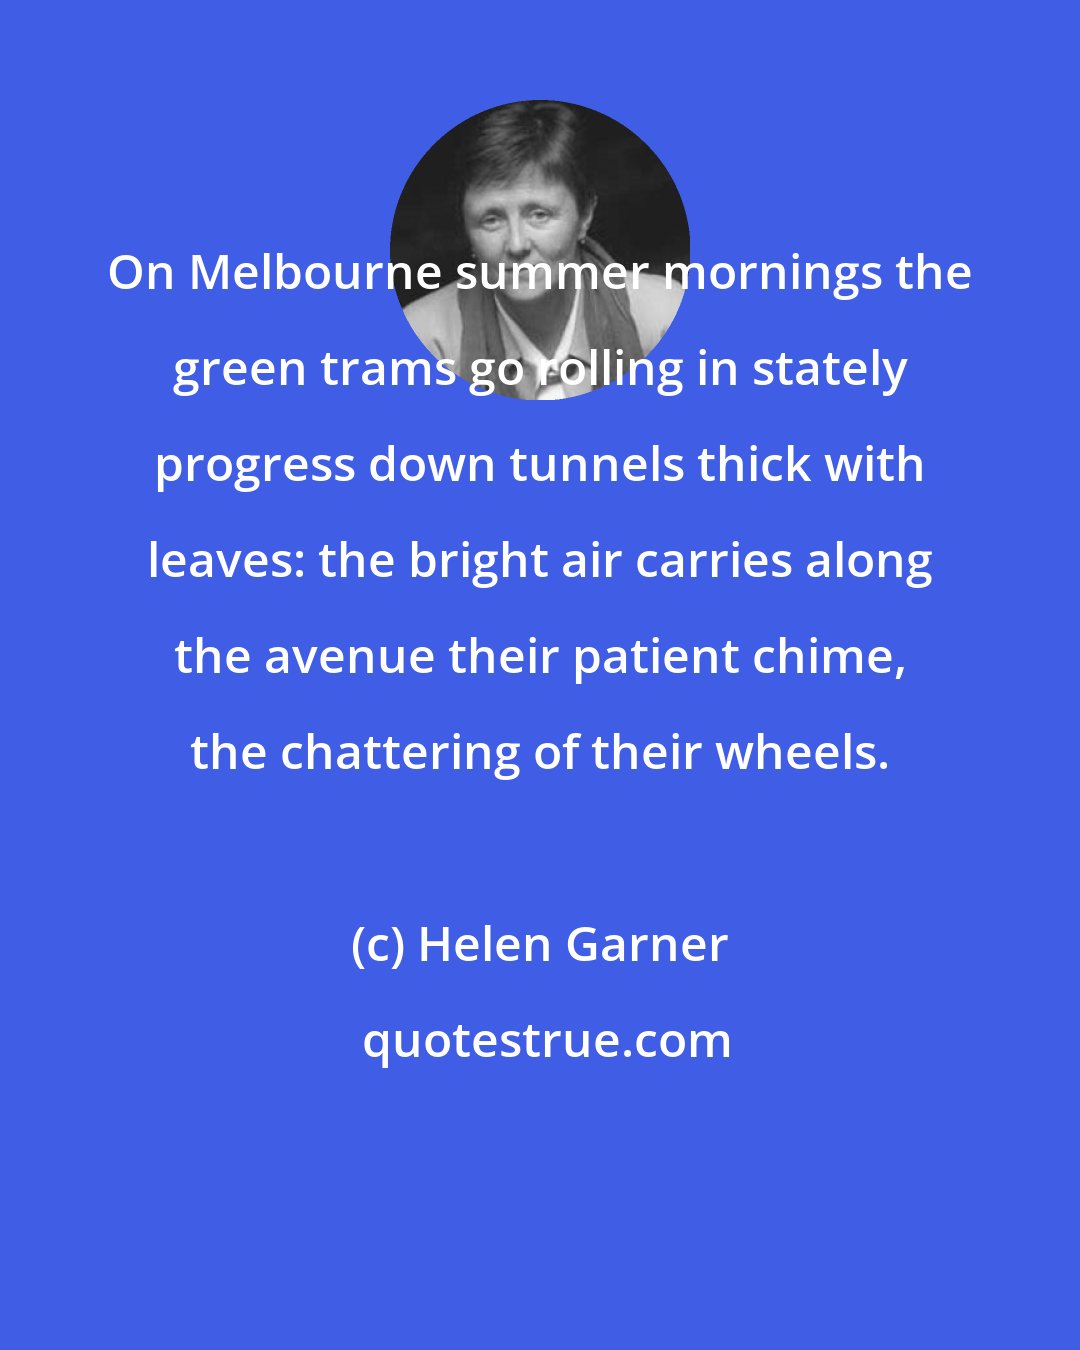 Helen Garner: On Melbourne summer mornings the green trams go rolling in stately progress down tunnels thick with leaves: the bright air carries along the avenue their patient chime, the chattering of their wheels.